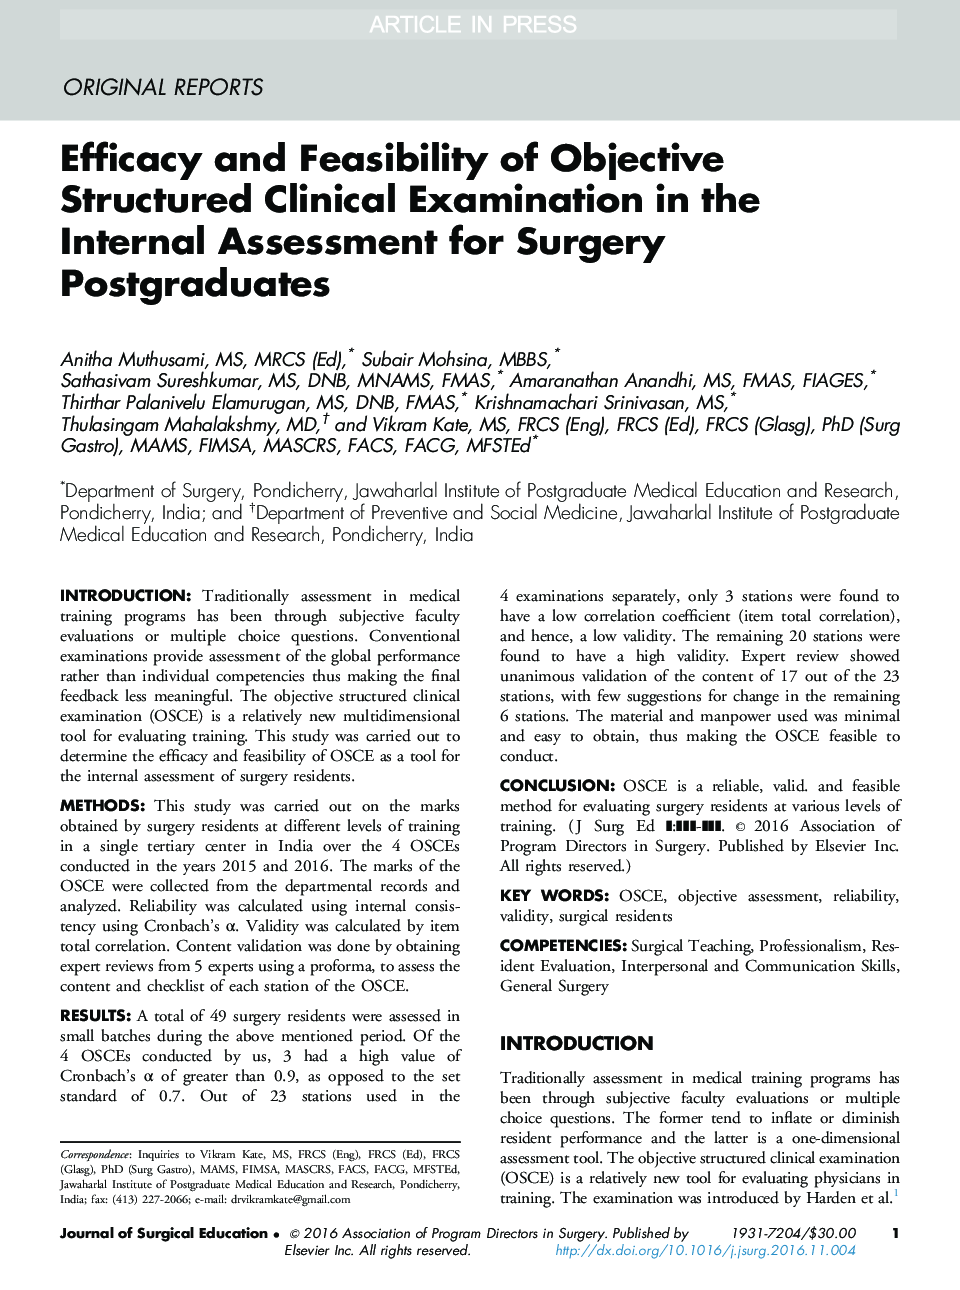 Efficacy and Feasibility of Objective Structured Clinical Examination in the Internal Assessment for Surgery Postgraduates